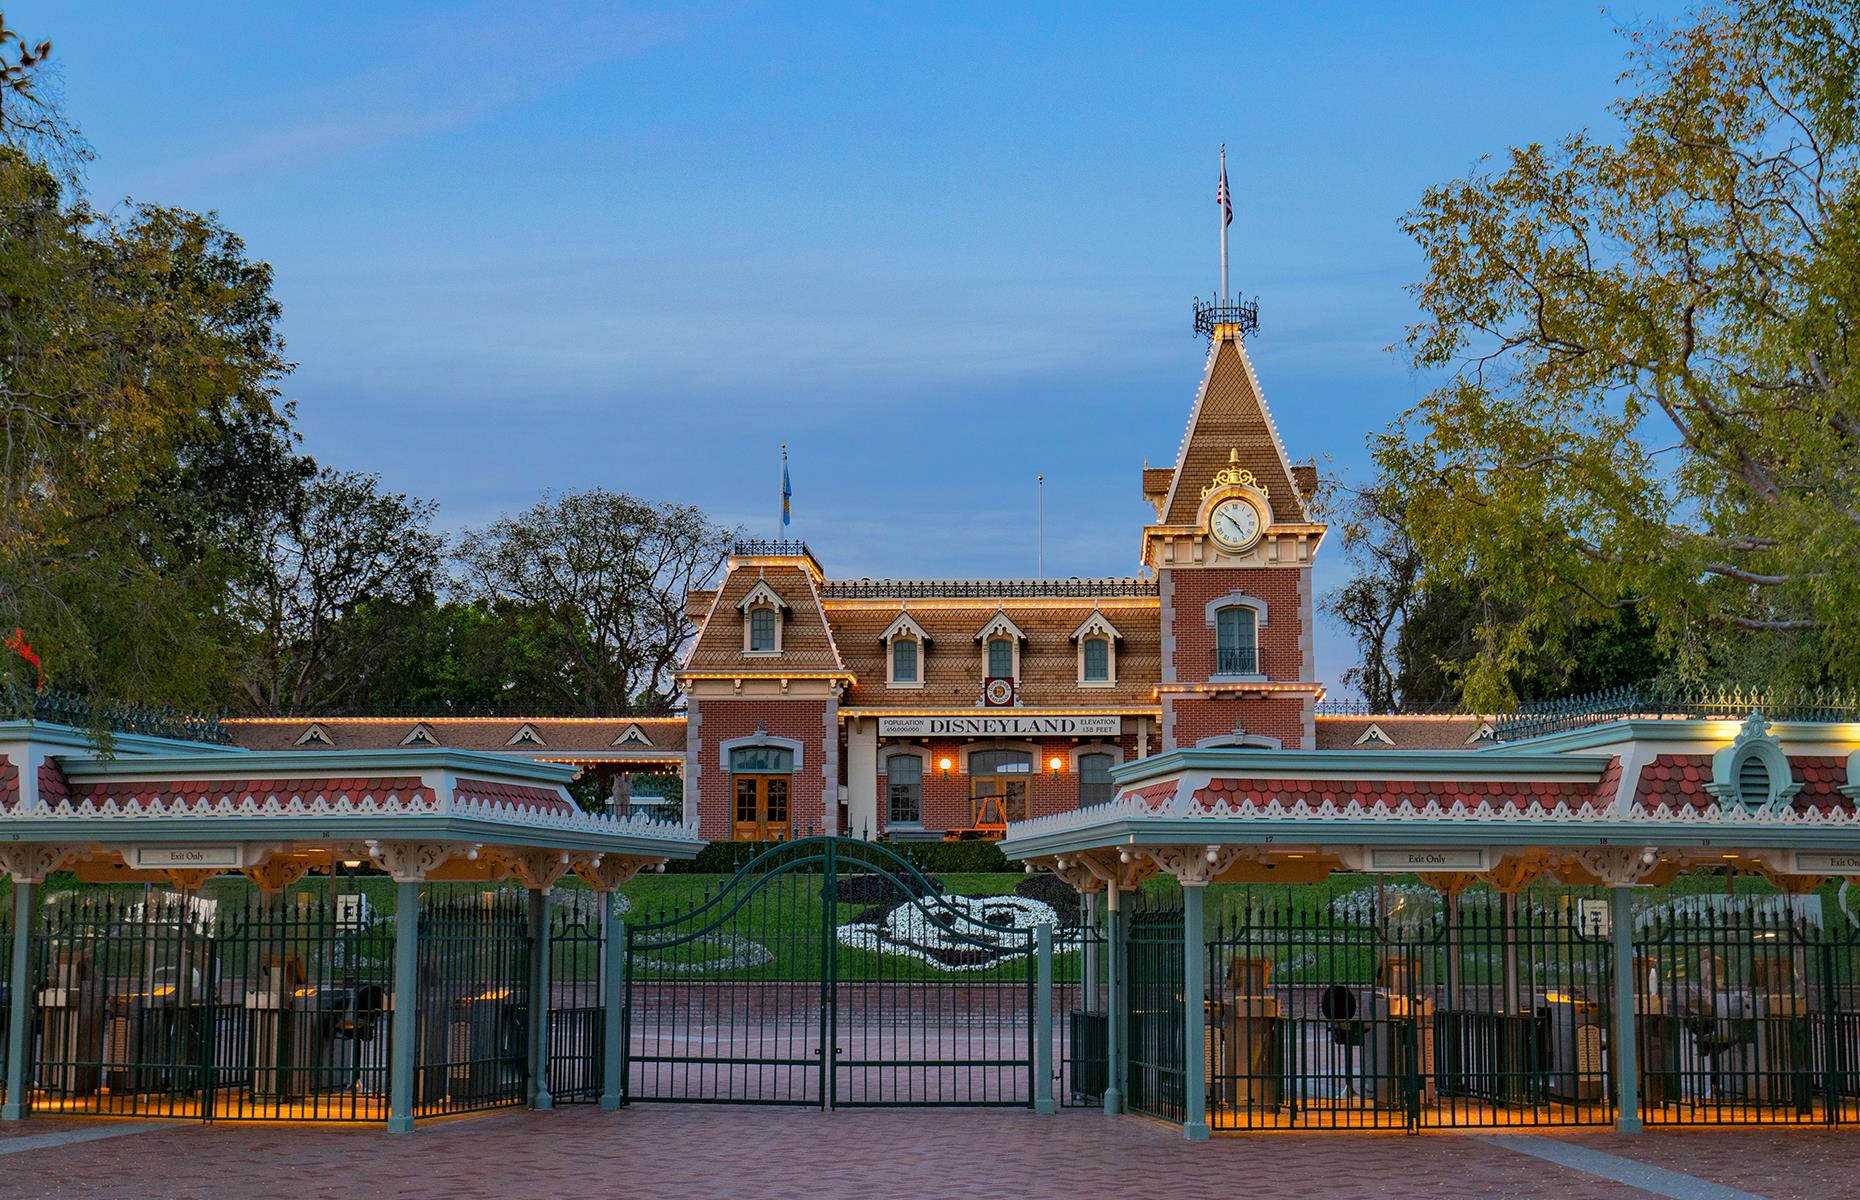 Disney's magic was dimmed for a while in 2020, as the COVID-19 pandemic closed parks around the world. This dusk shot shows the gates of California's eerily quiet Disneyland Park firmly shuttered on 21 November 2020. It finally opened again in April 2021, after a 13-month closure.